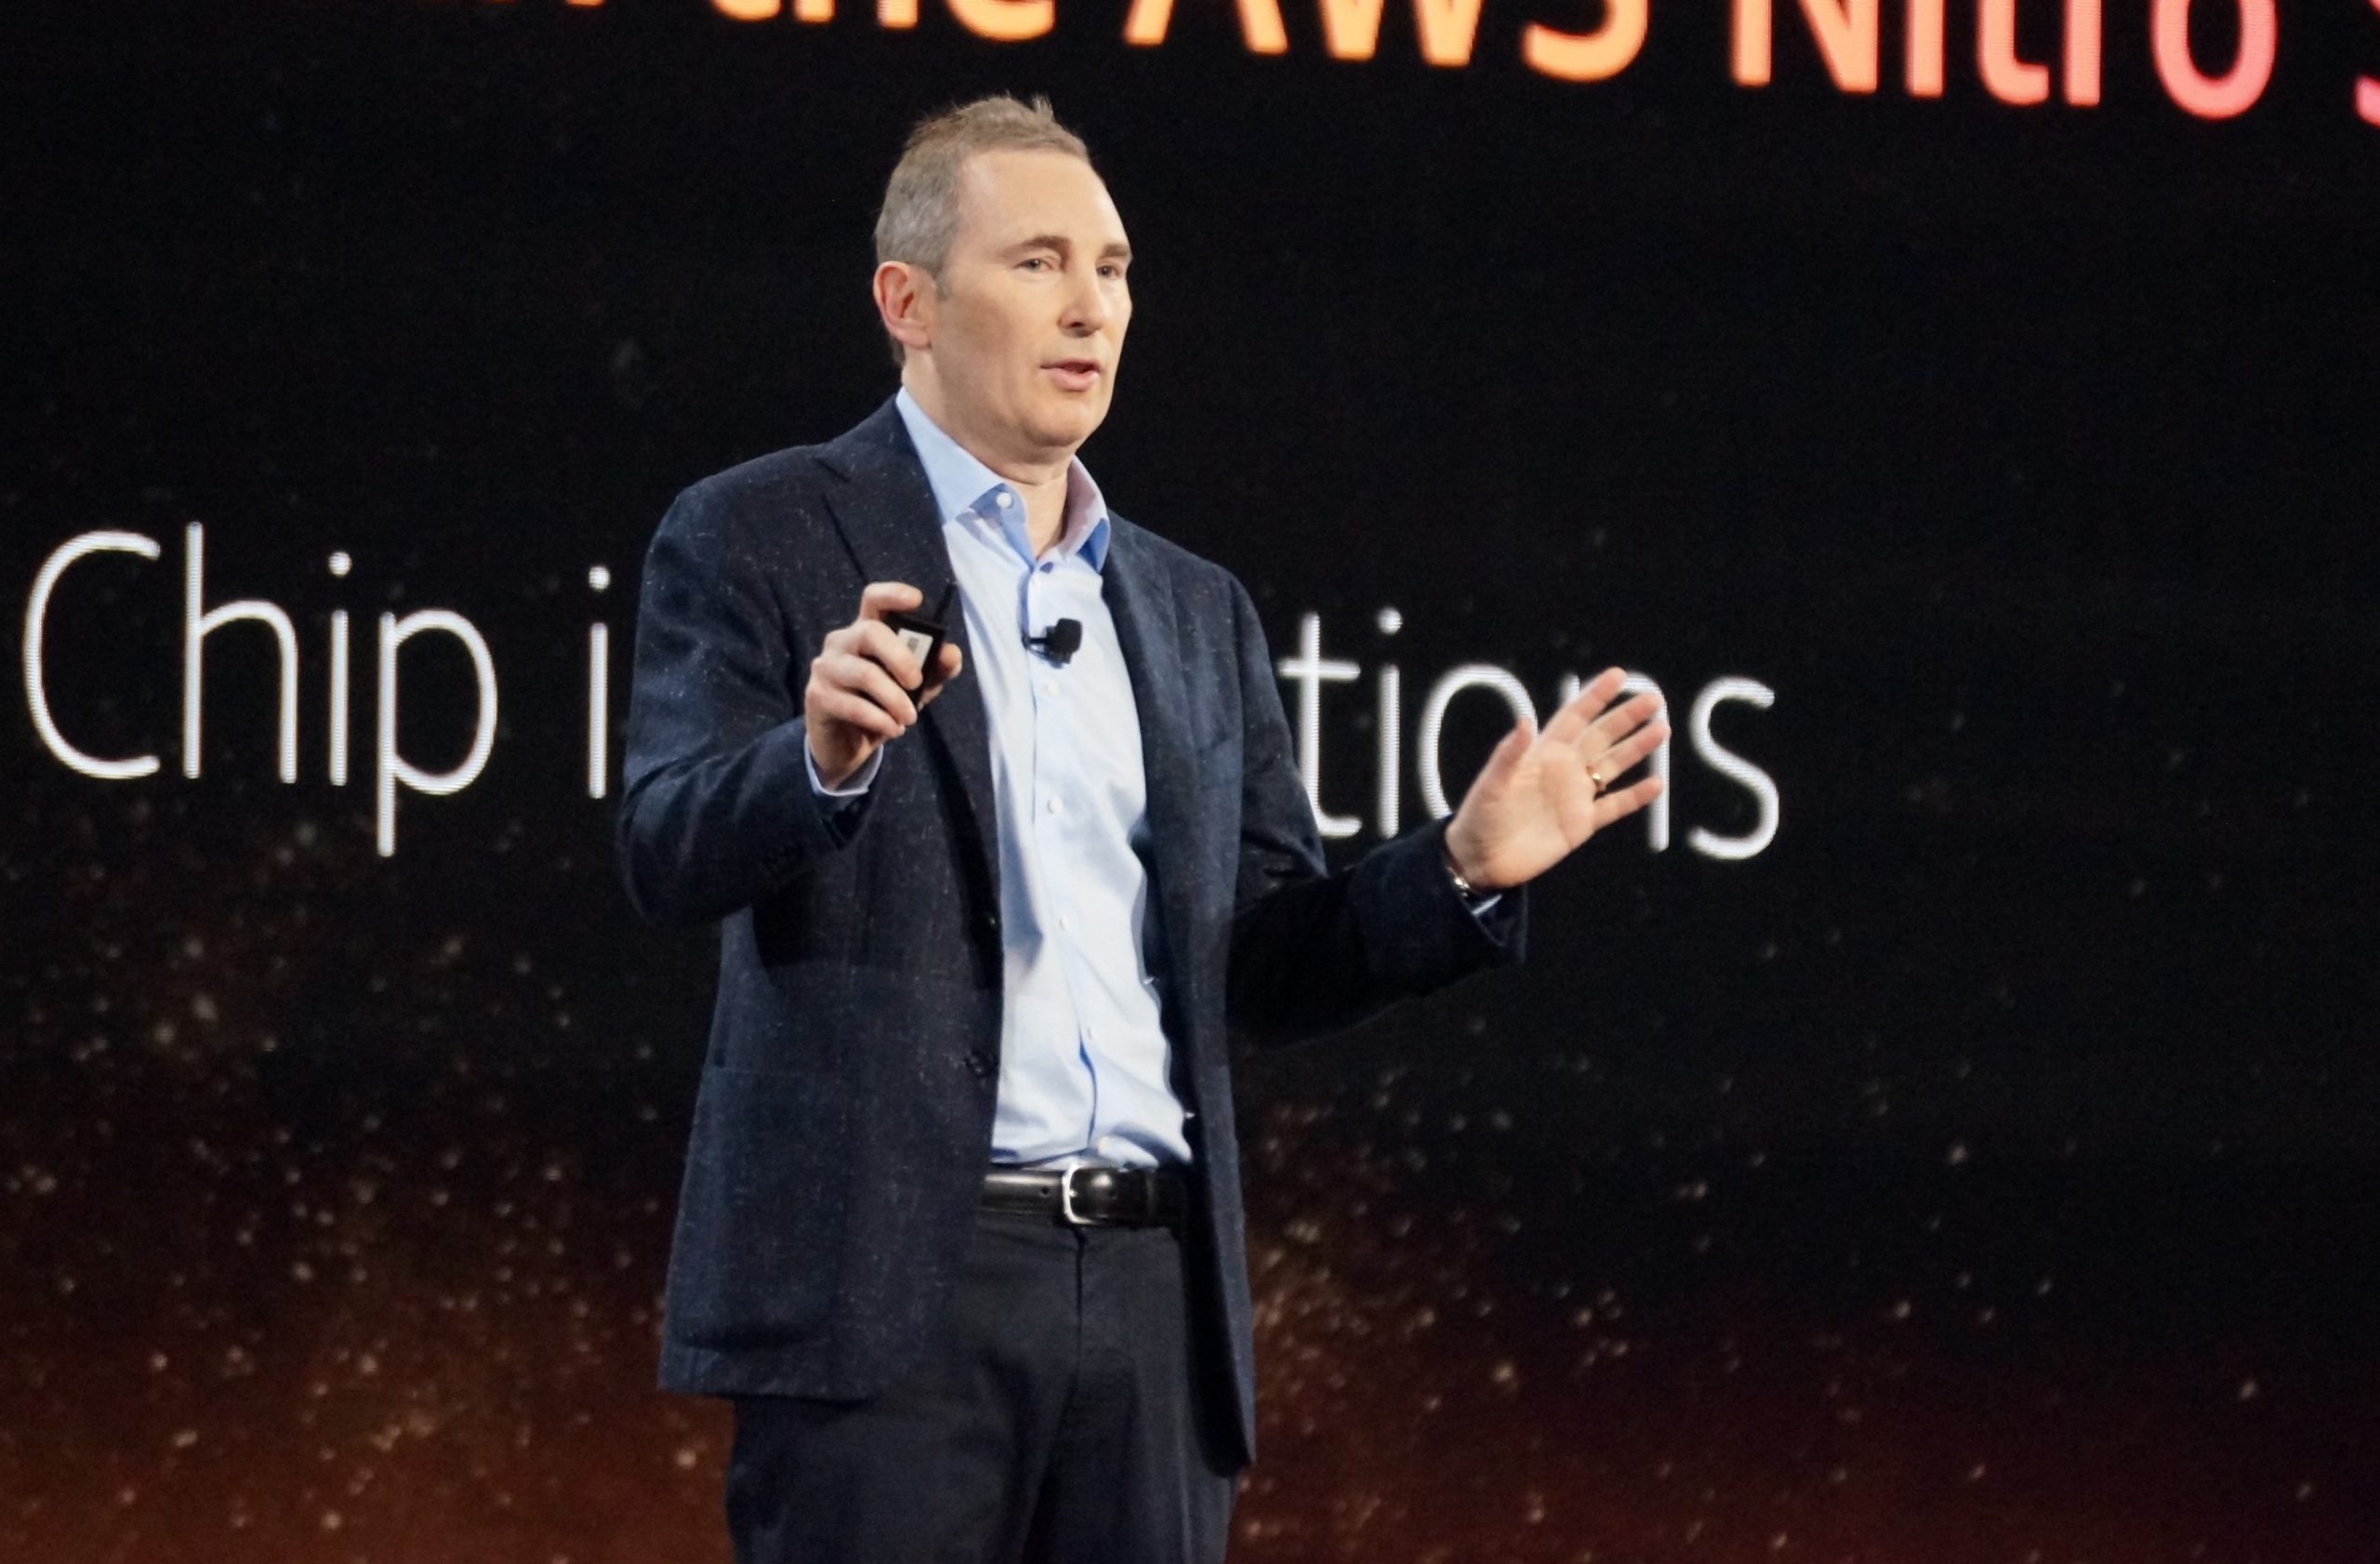 Andy Jassy will join Amazon’s board of directors as he replaces Jeff Bezos as CEO of tech giant